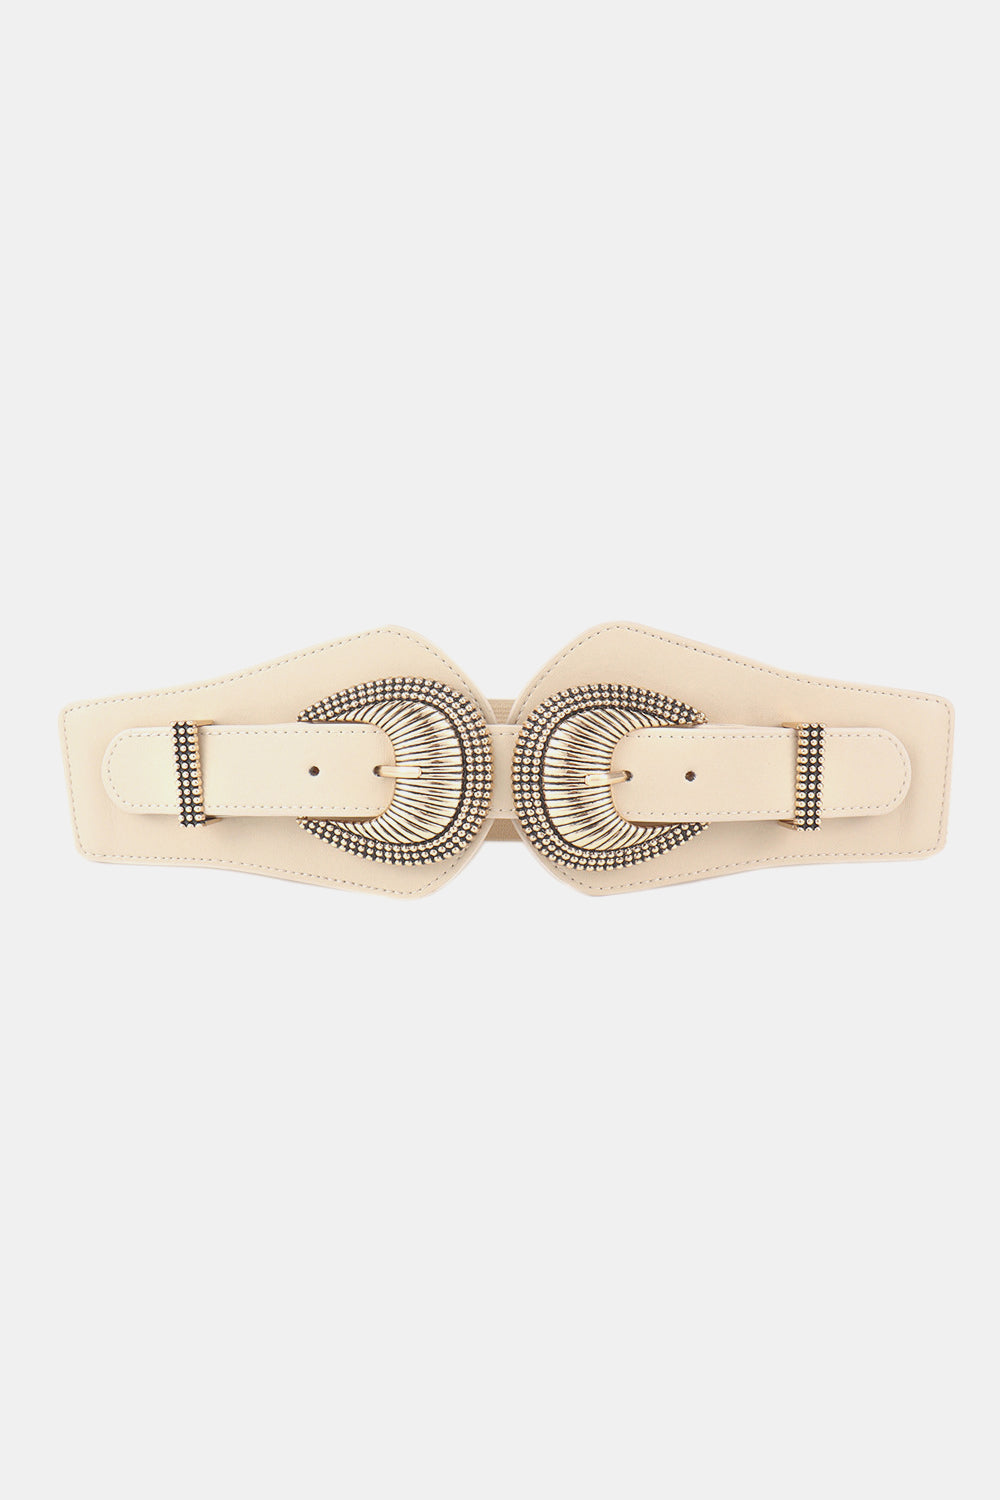 Shell Double Buckle Elastic Wide Belt king-general-store-5710.myshopify.com